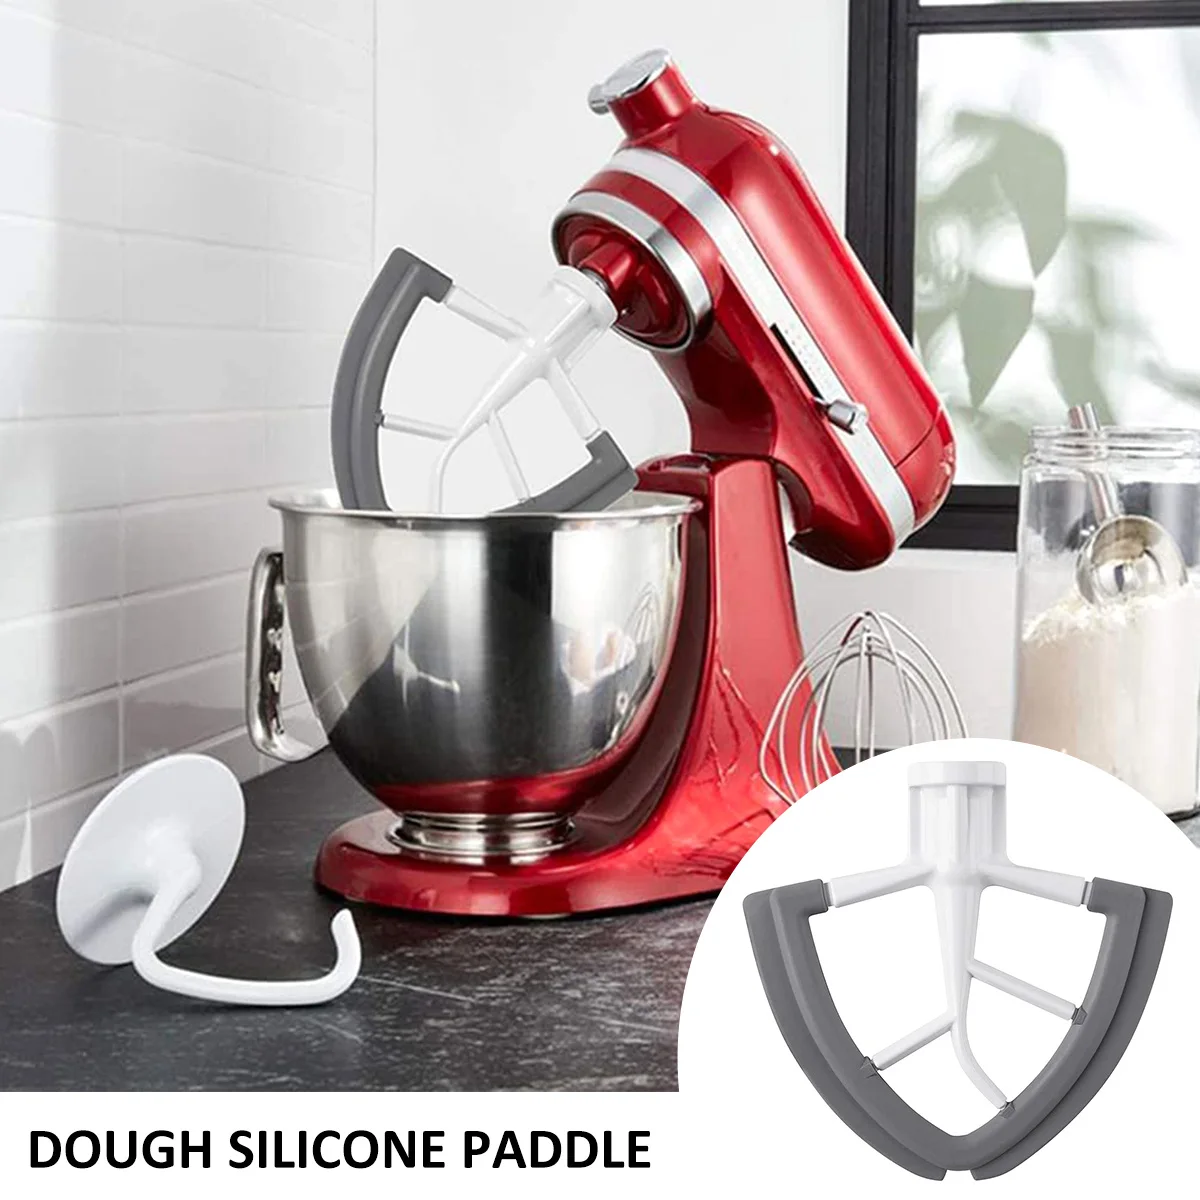 https://ae01.alicdn.com/kf/Sf21921a8bd4f4ee0ae705407a3971d5ck/4-5-5QT-Flex-Edge-Beater-Silicone-Mixer-Paddle-For-Kitchenaid-Tilt-head-Stand-Mixing-Replacement.jpg